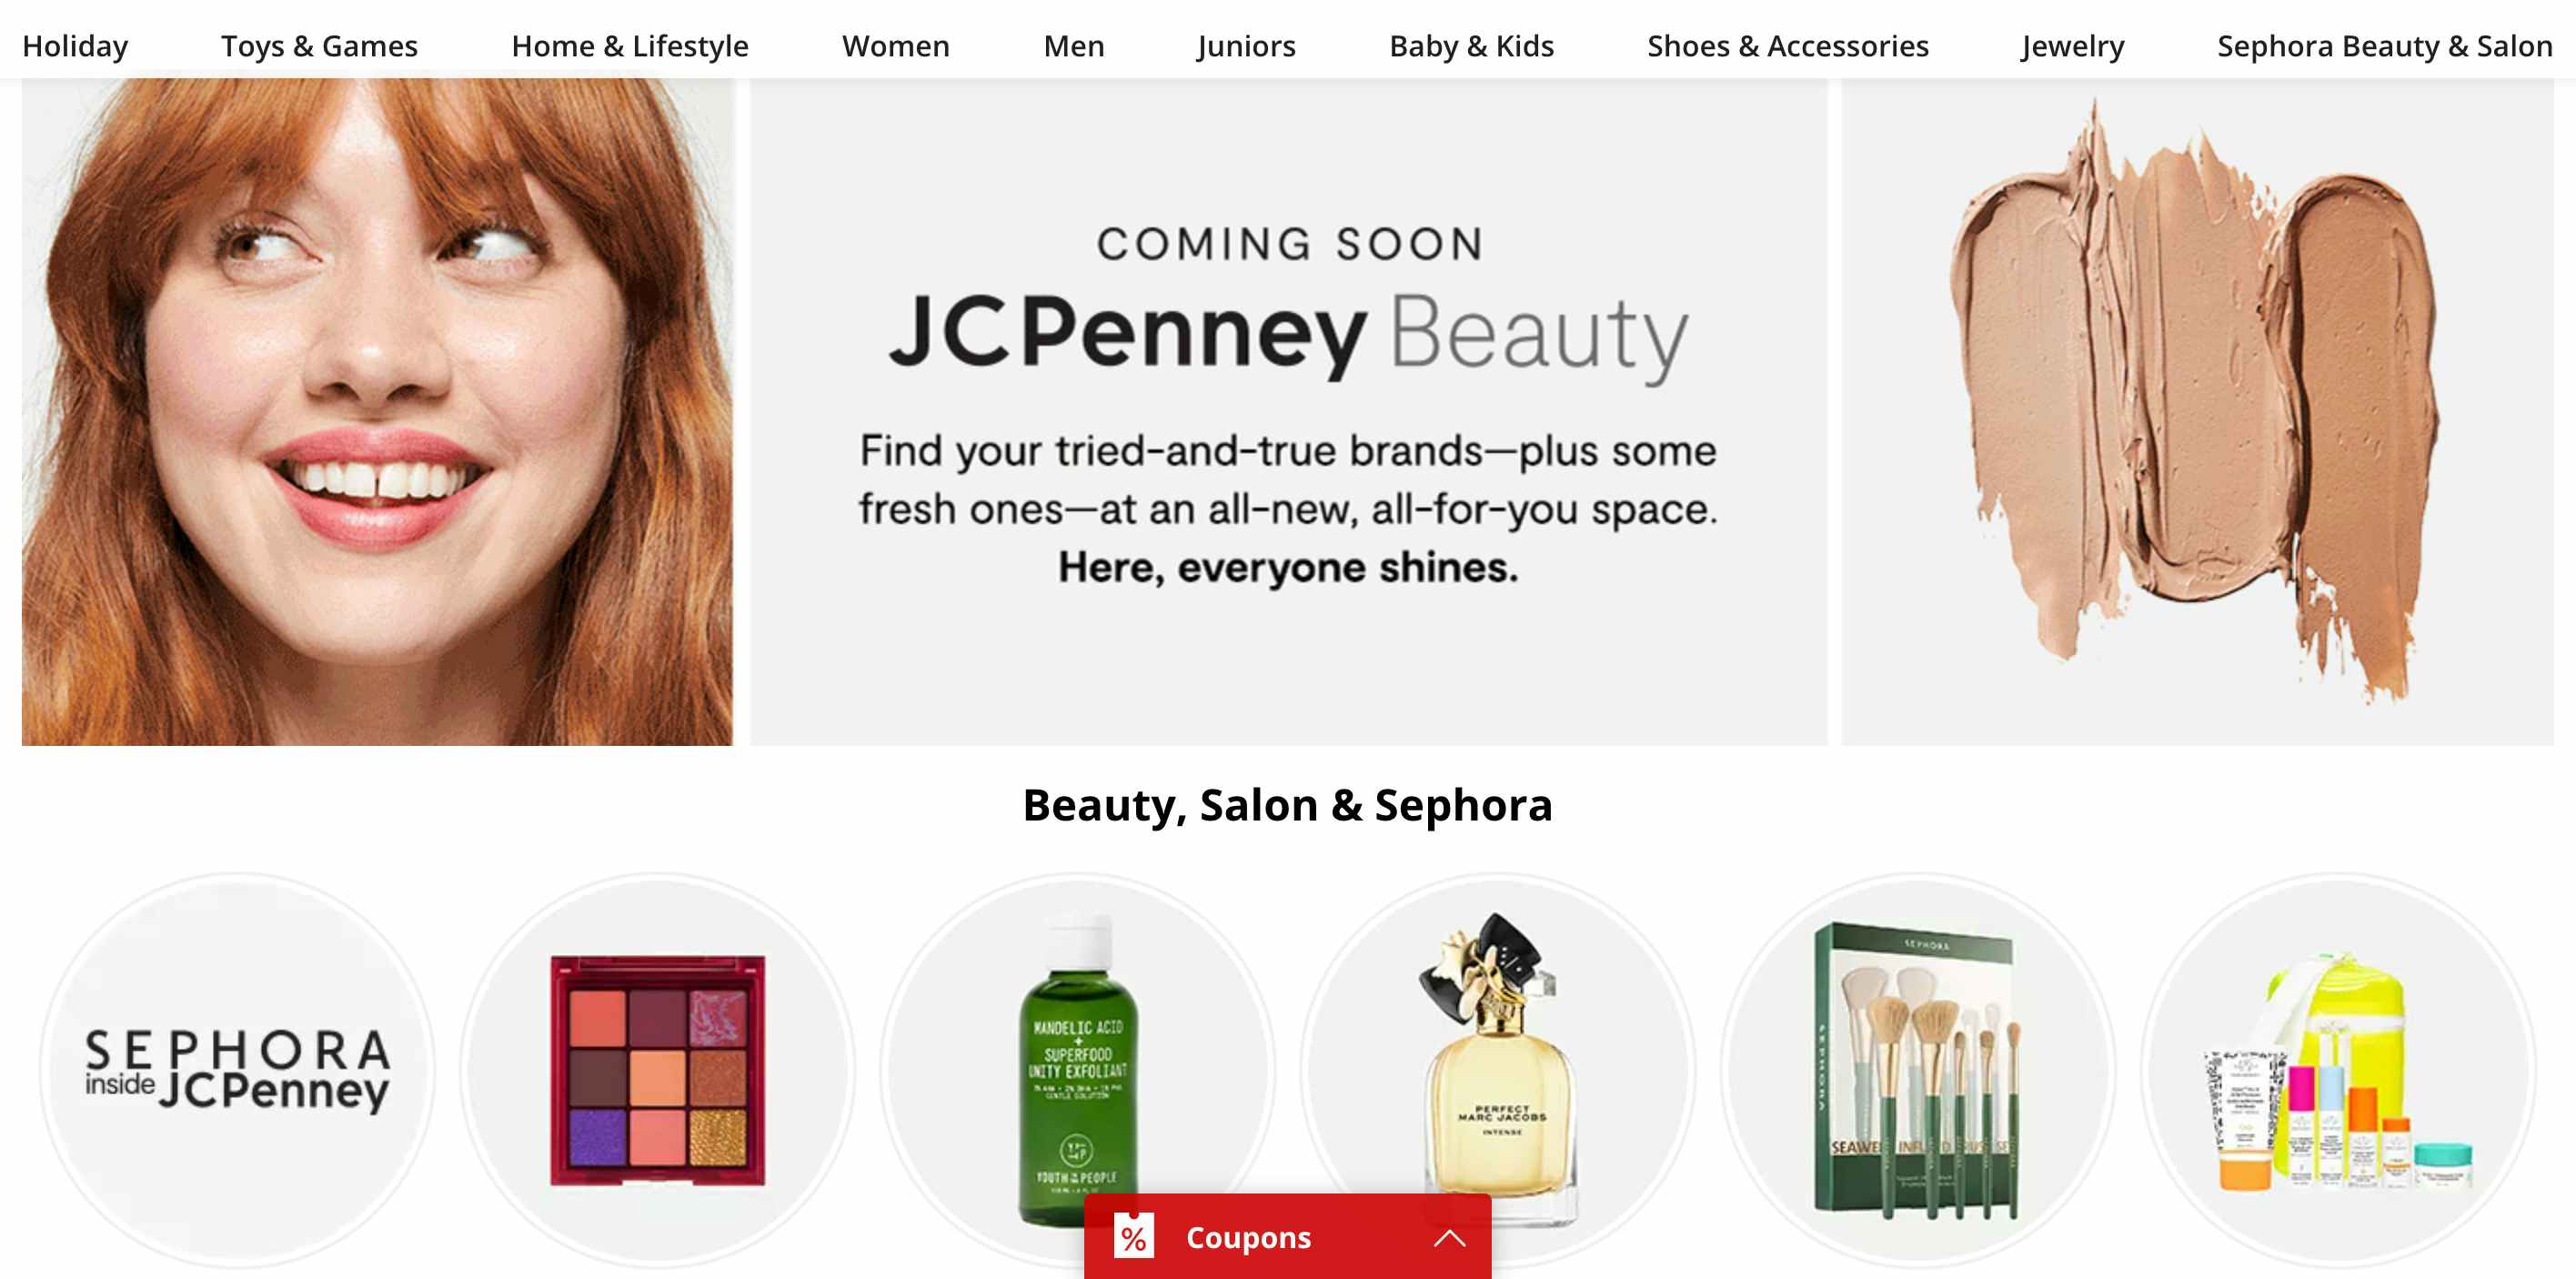 The brands you'll find at the new JCPenney Beauty concept will